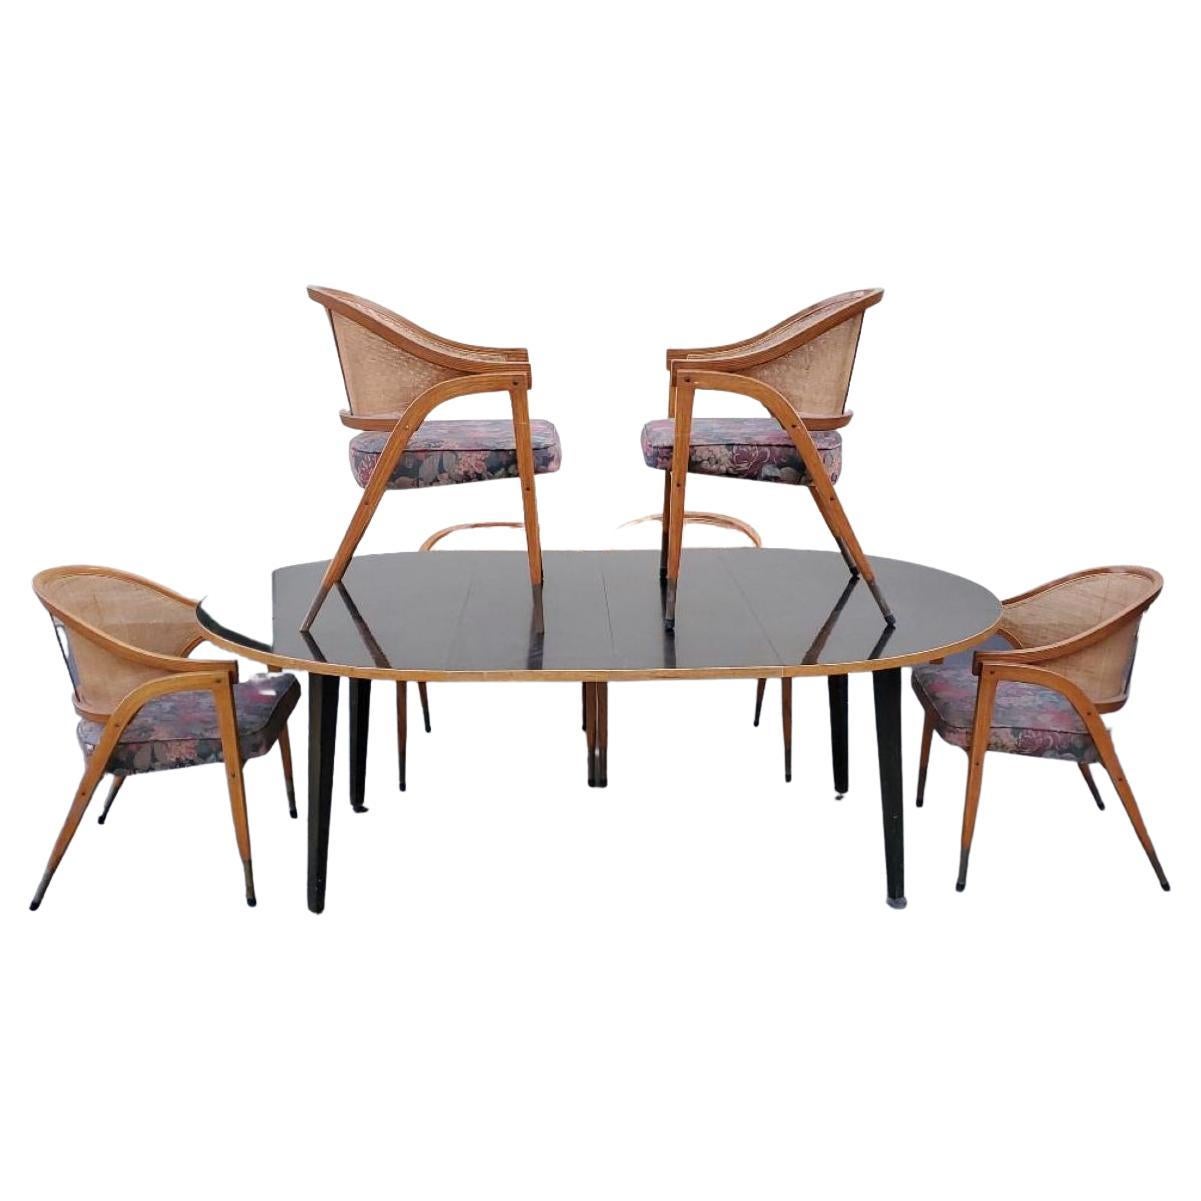 1950s Edward Wormley for Dunbar Extension Dining Set 6 Chairs 2 Leaves